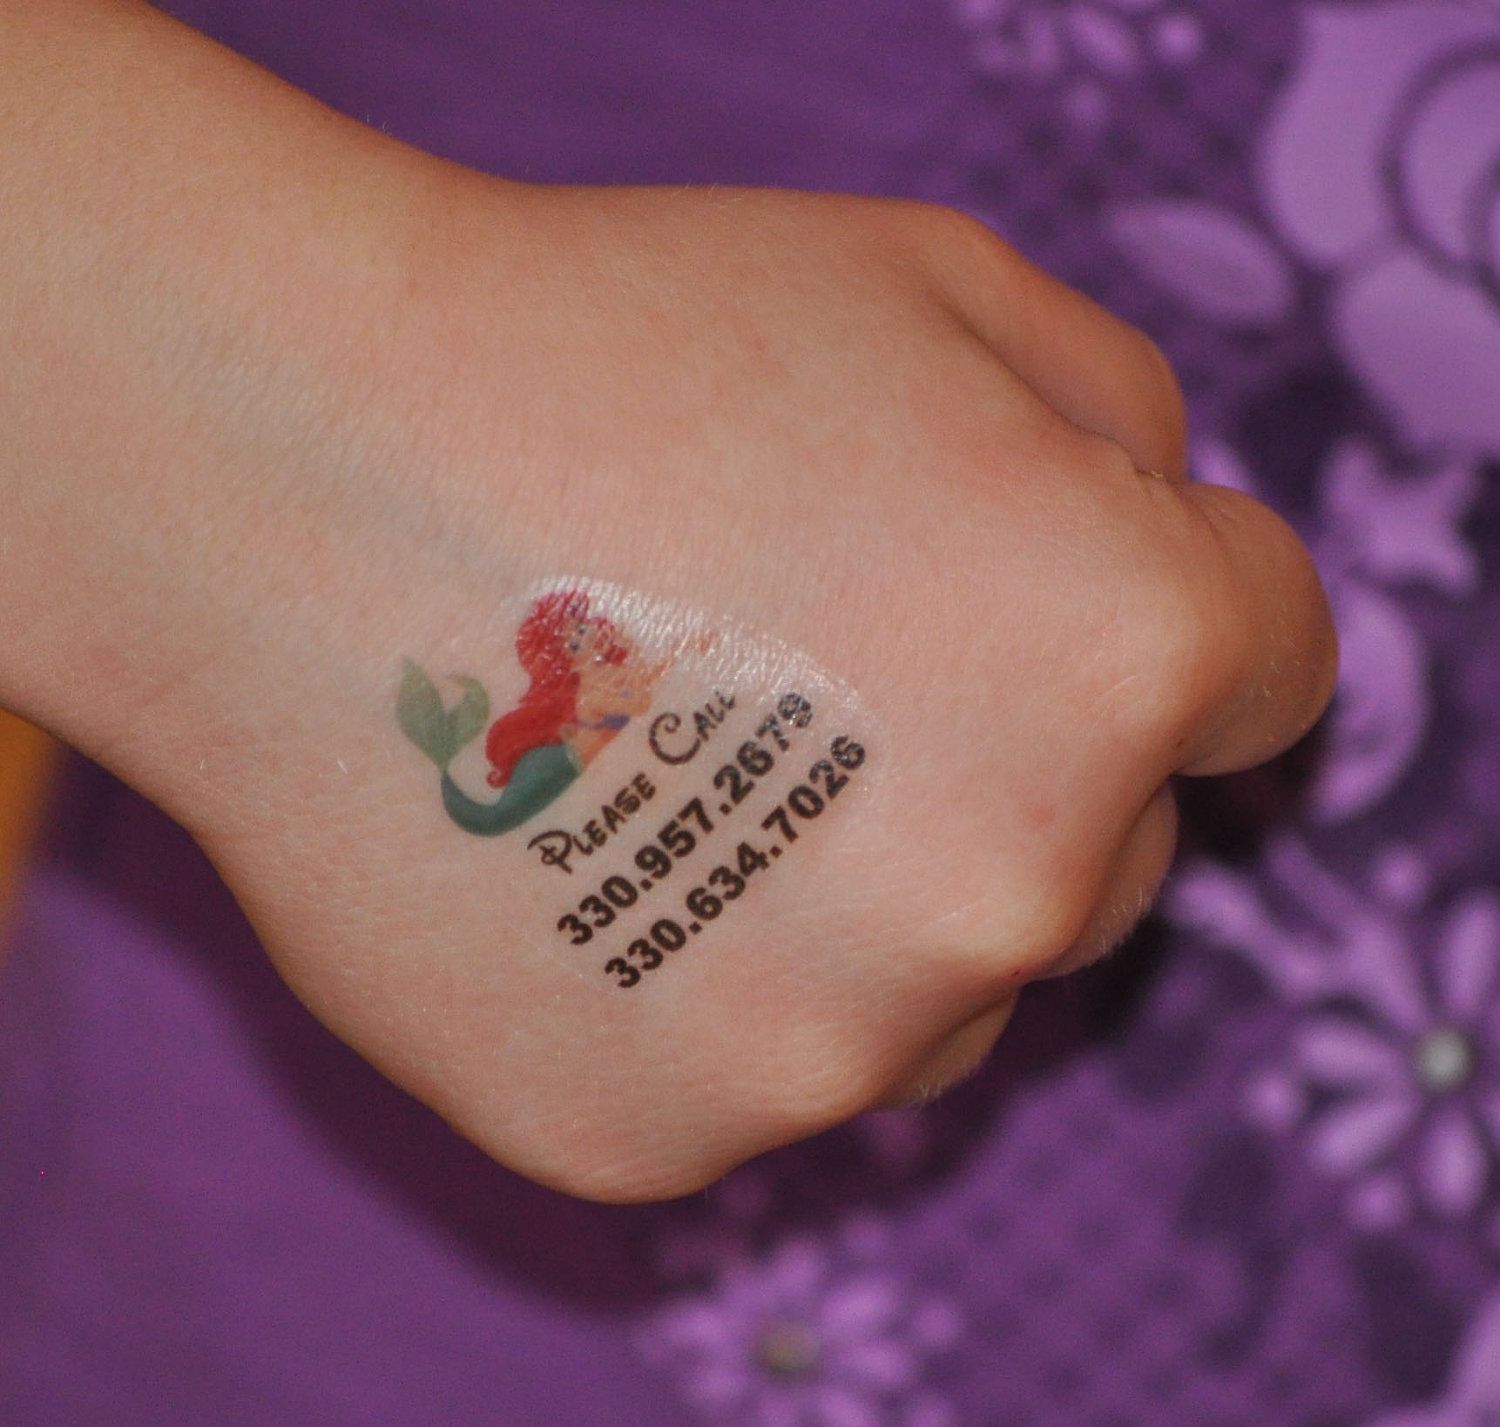 Child Safety I.D. Personalized Temporary Tattoo